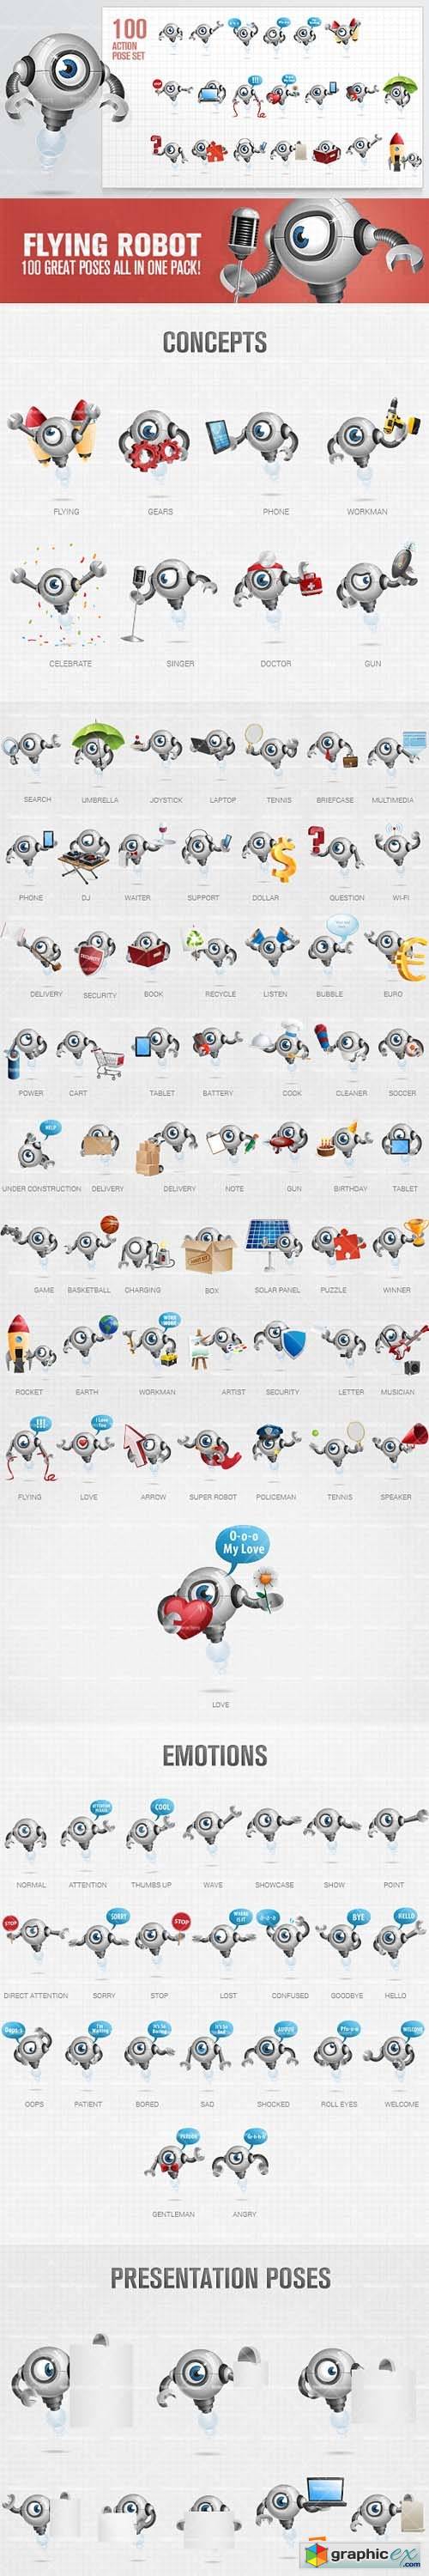 Flying Robot with Wrench Hands Cartoon Character Set